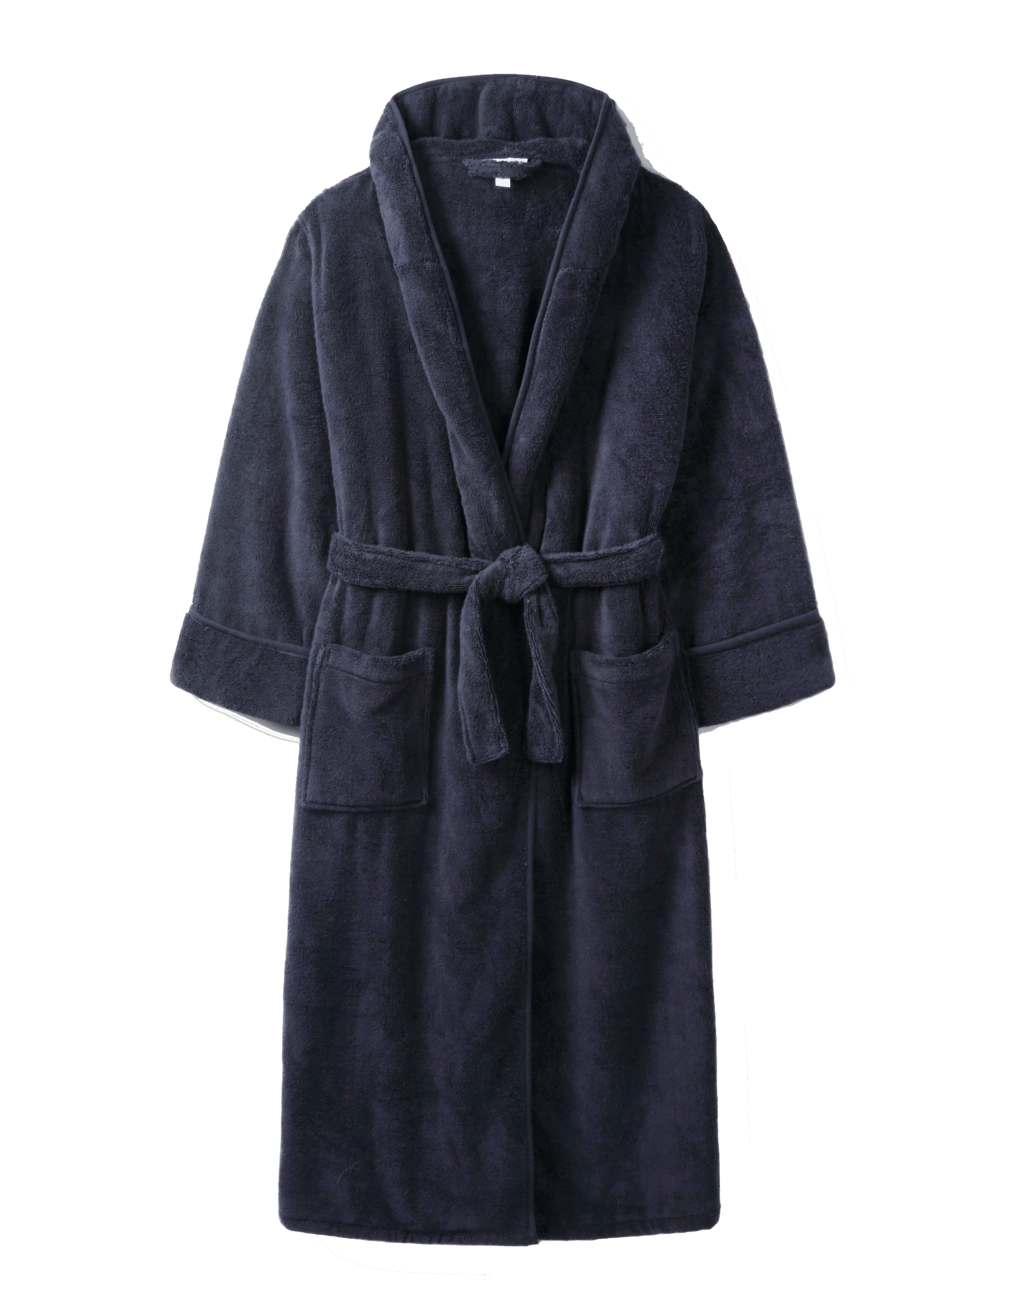 best robes for women